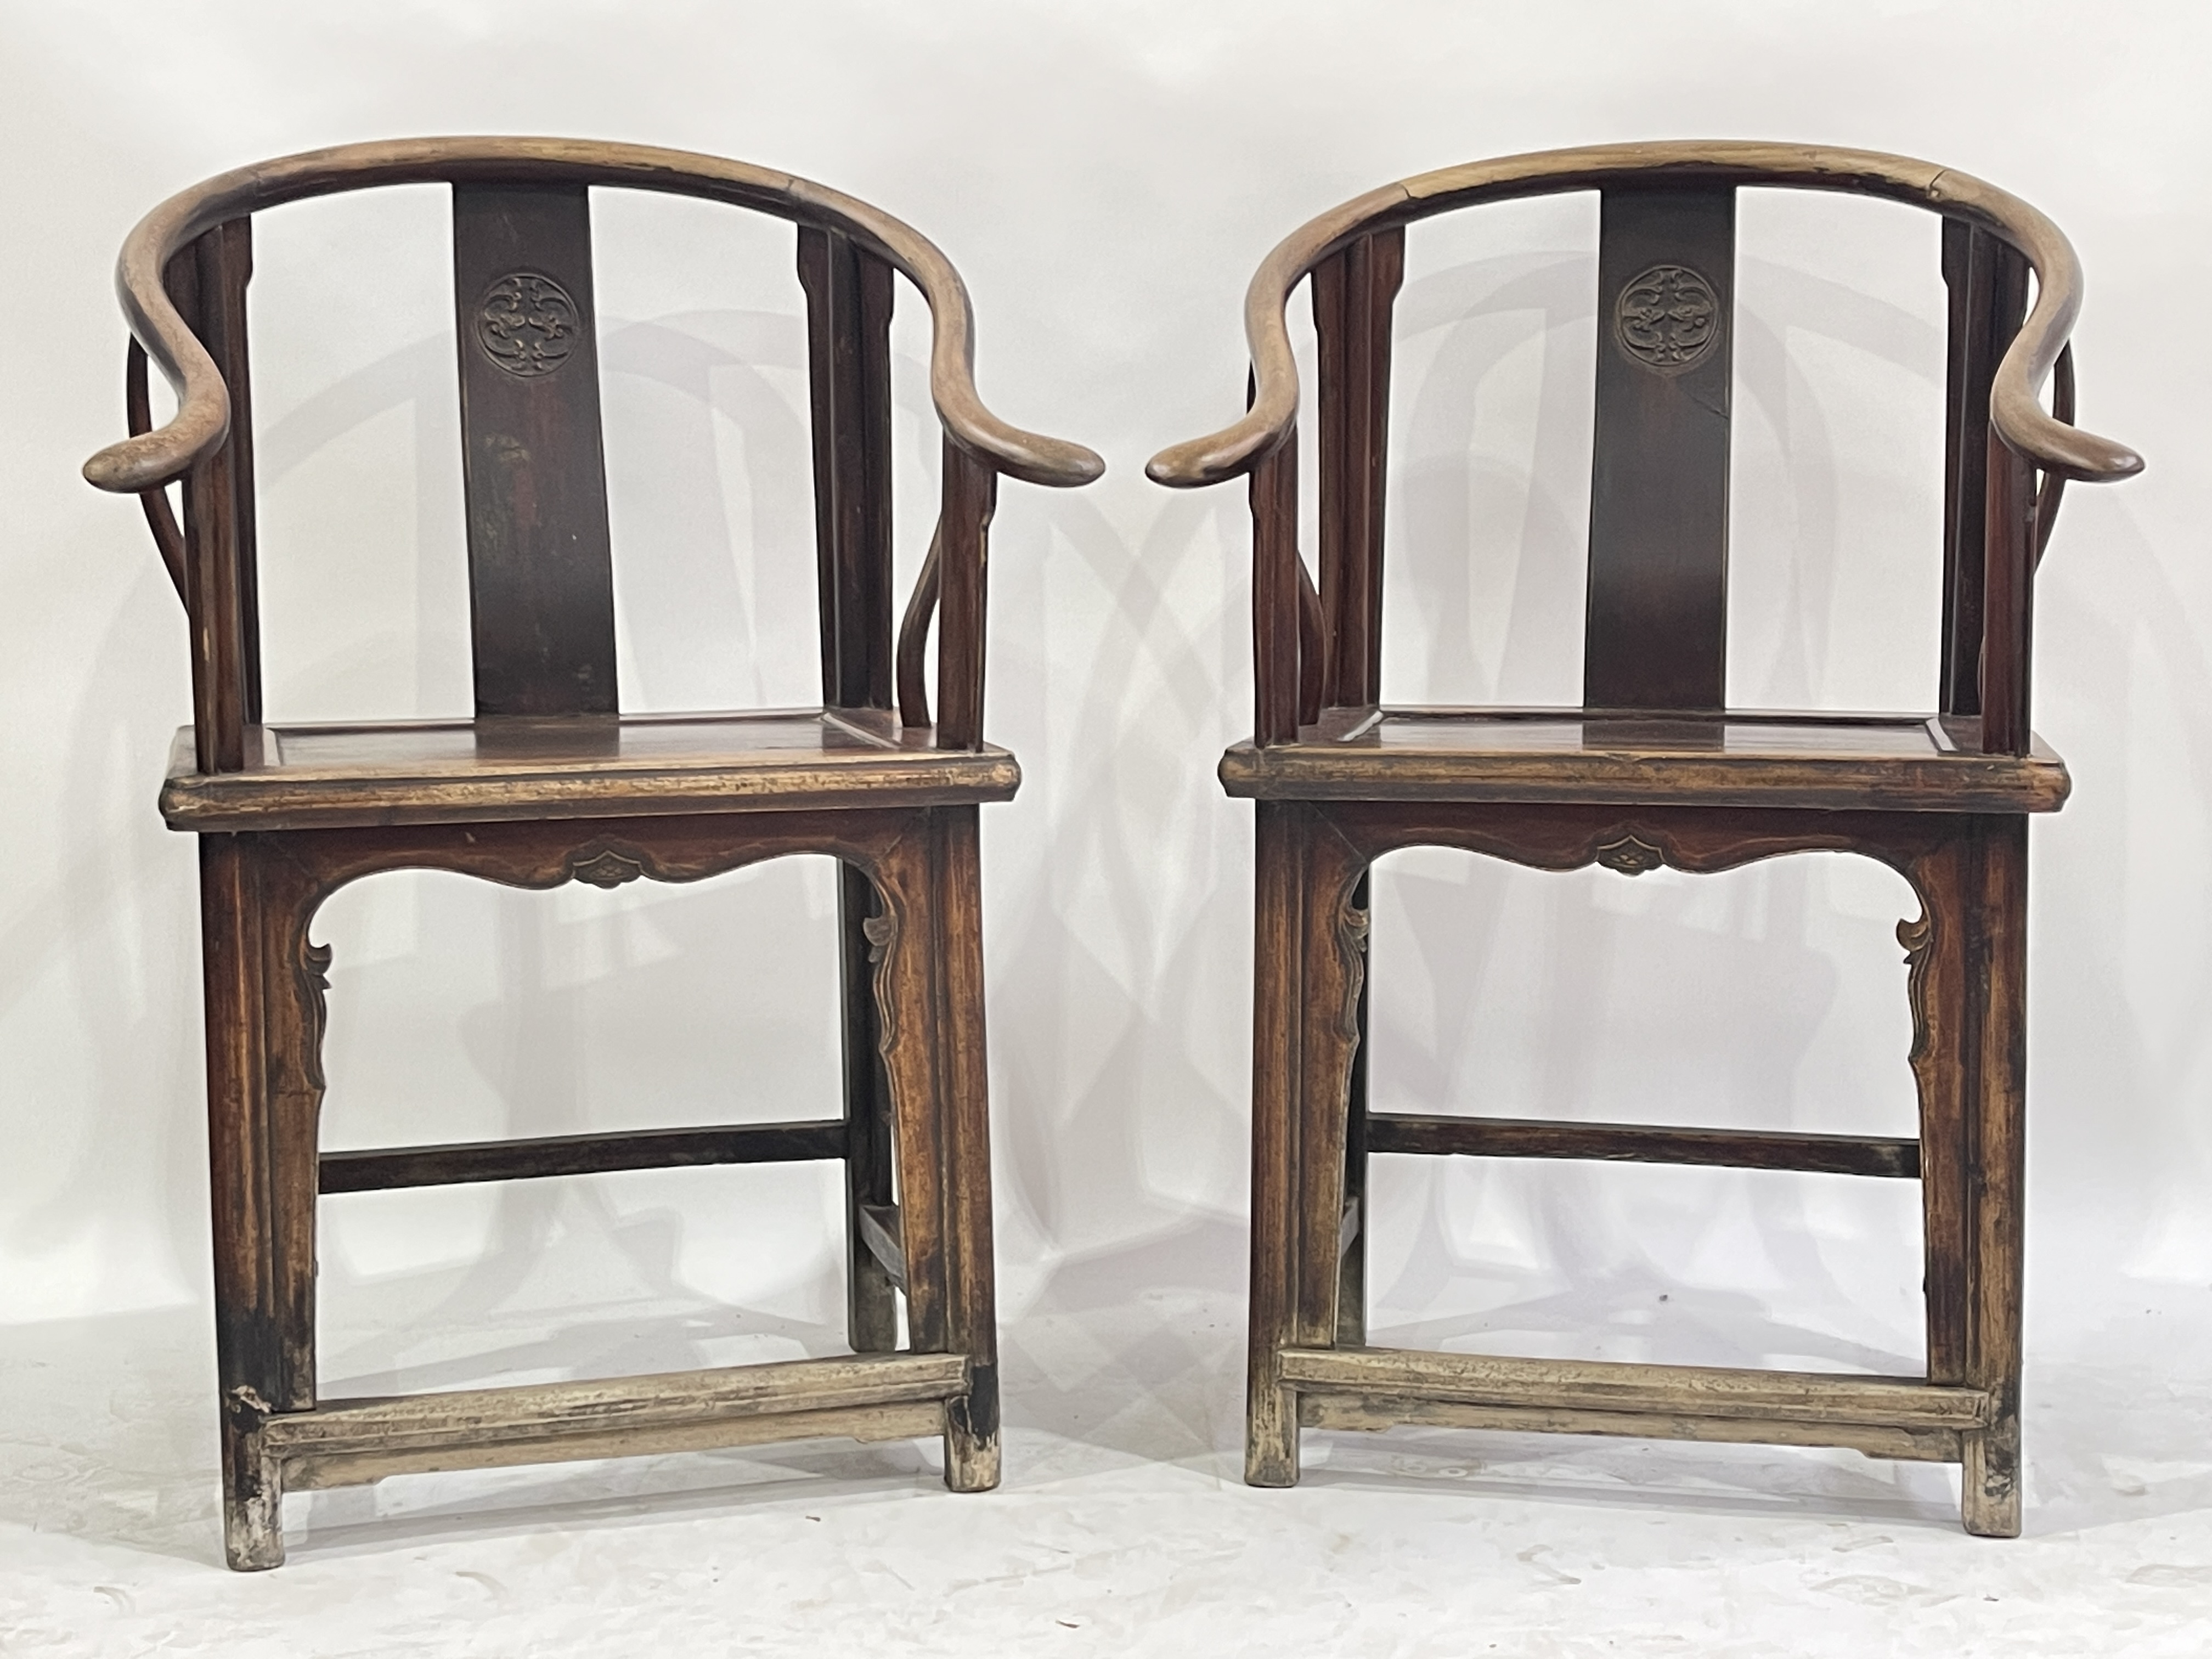 A pair of Chinese horseshoe-back wooden armchairs, North China, late Qing Dynasty, curved and